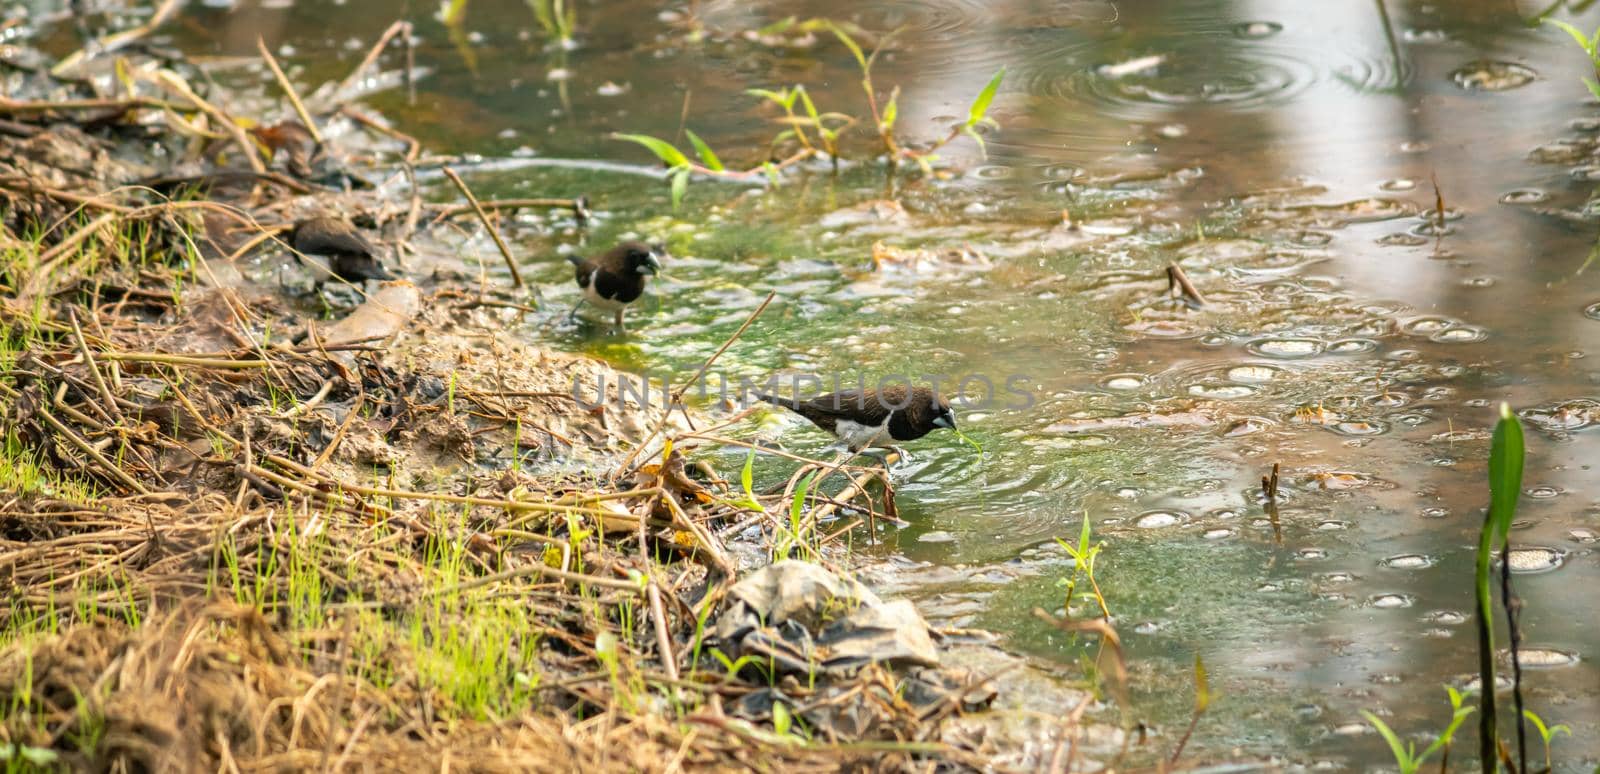 A small flock of birds eating green leaves in muddy waters.